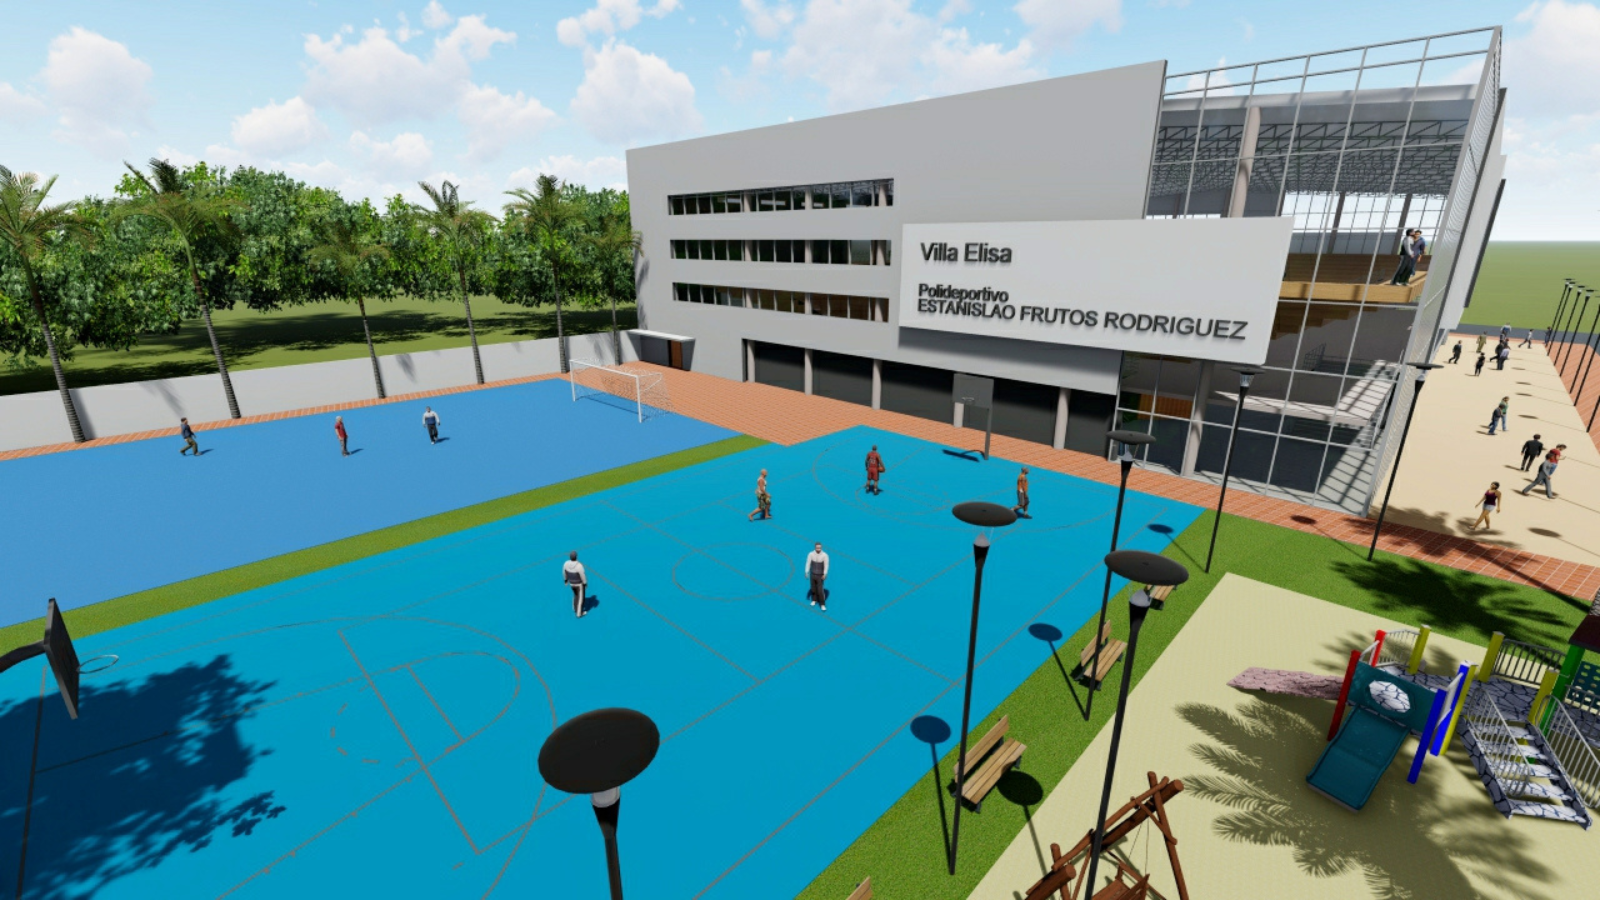 Villa Elisa will build a sports center for 3 thousand people